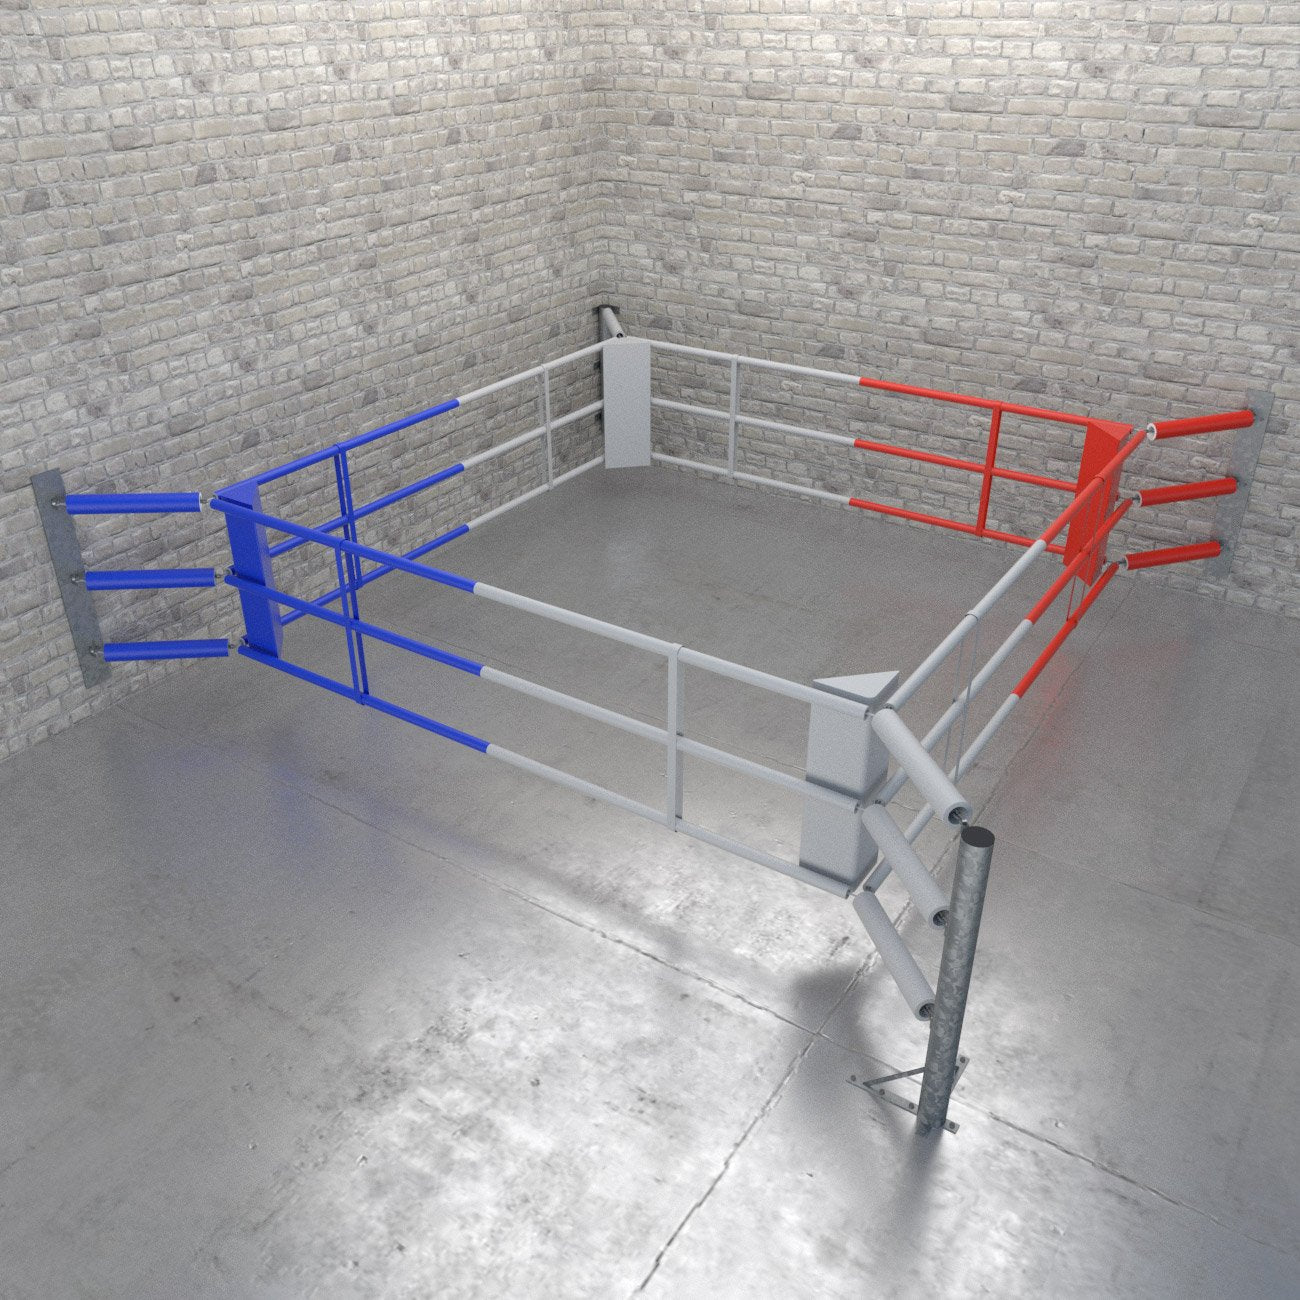 Floor Boxing Ring Fighter Wall with 3 ropes